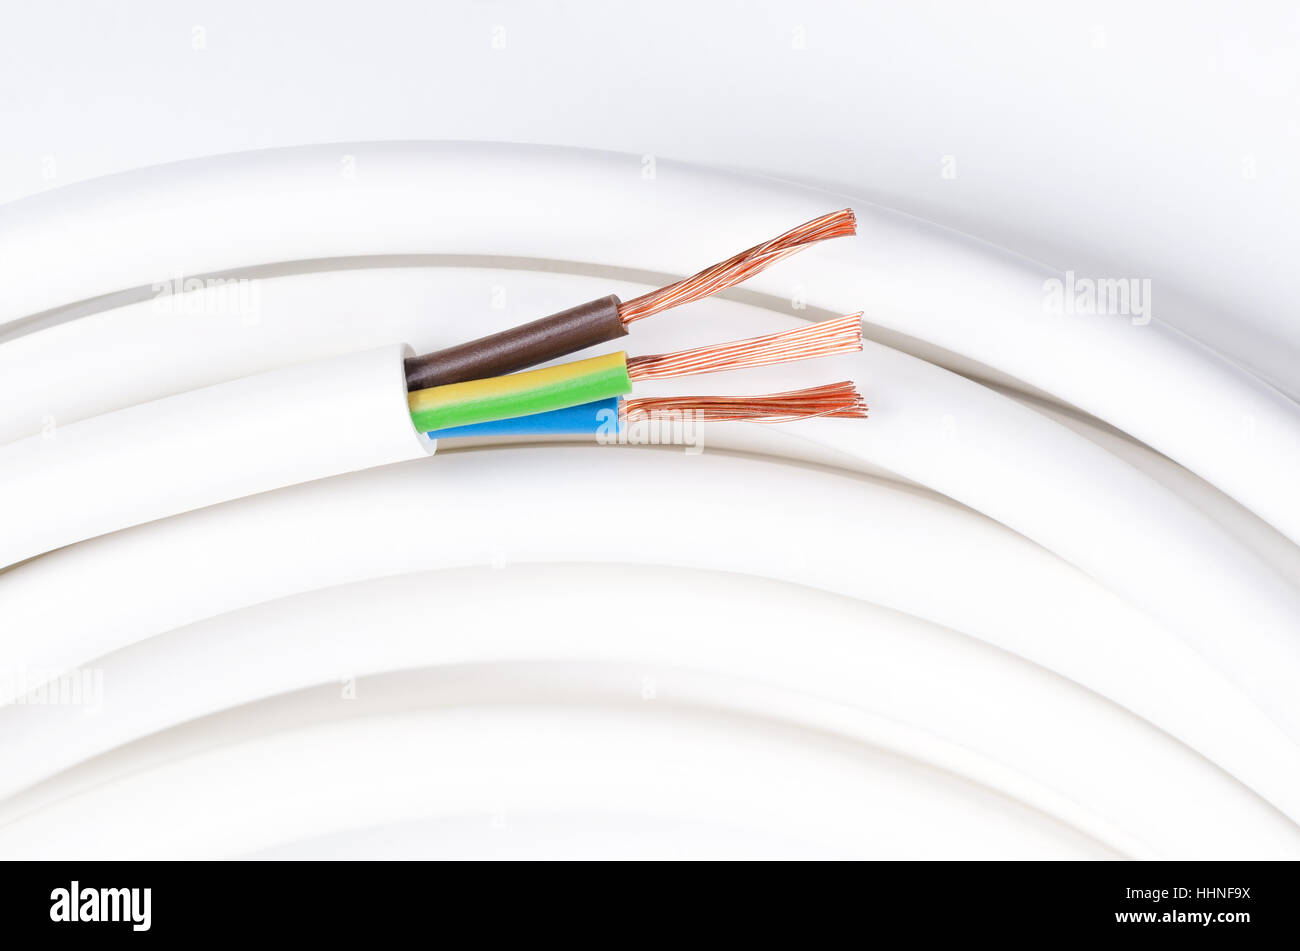 Electrical cable with three insulated conductors. Horizontal. Power cable cross-section. Cable jacket with wire insulation. Stock Photo